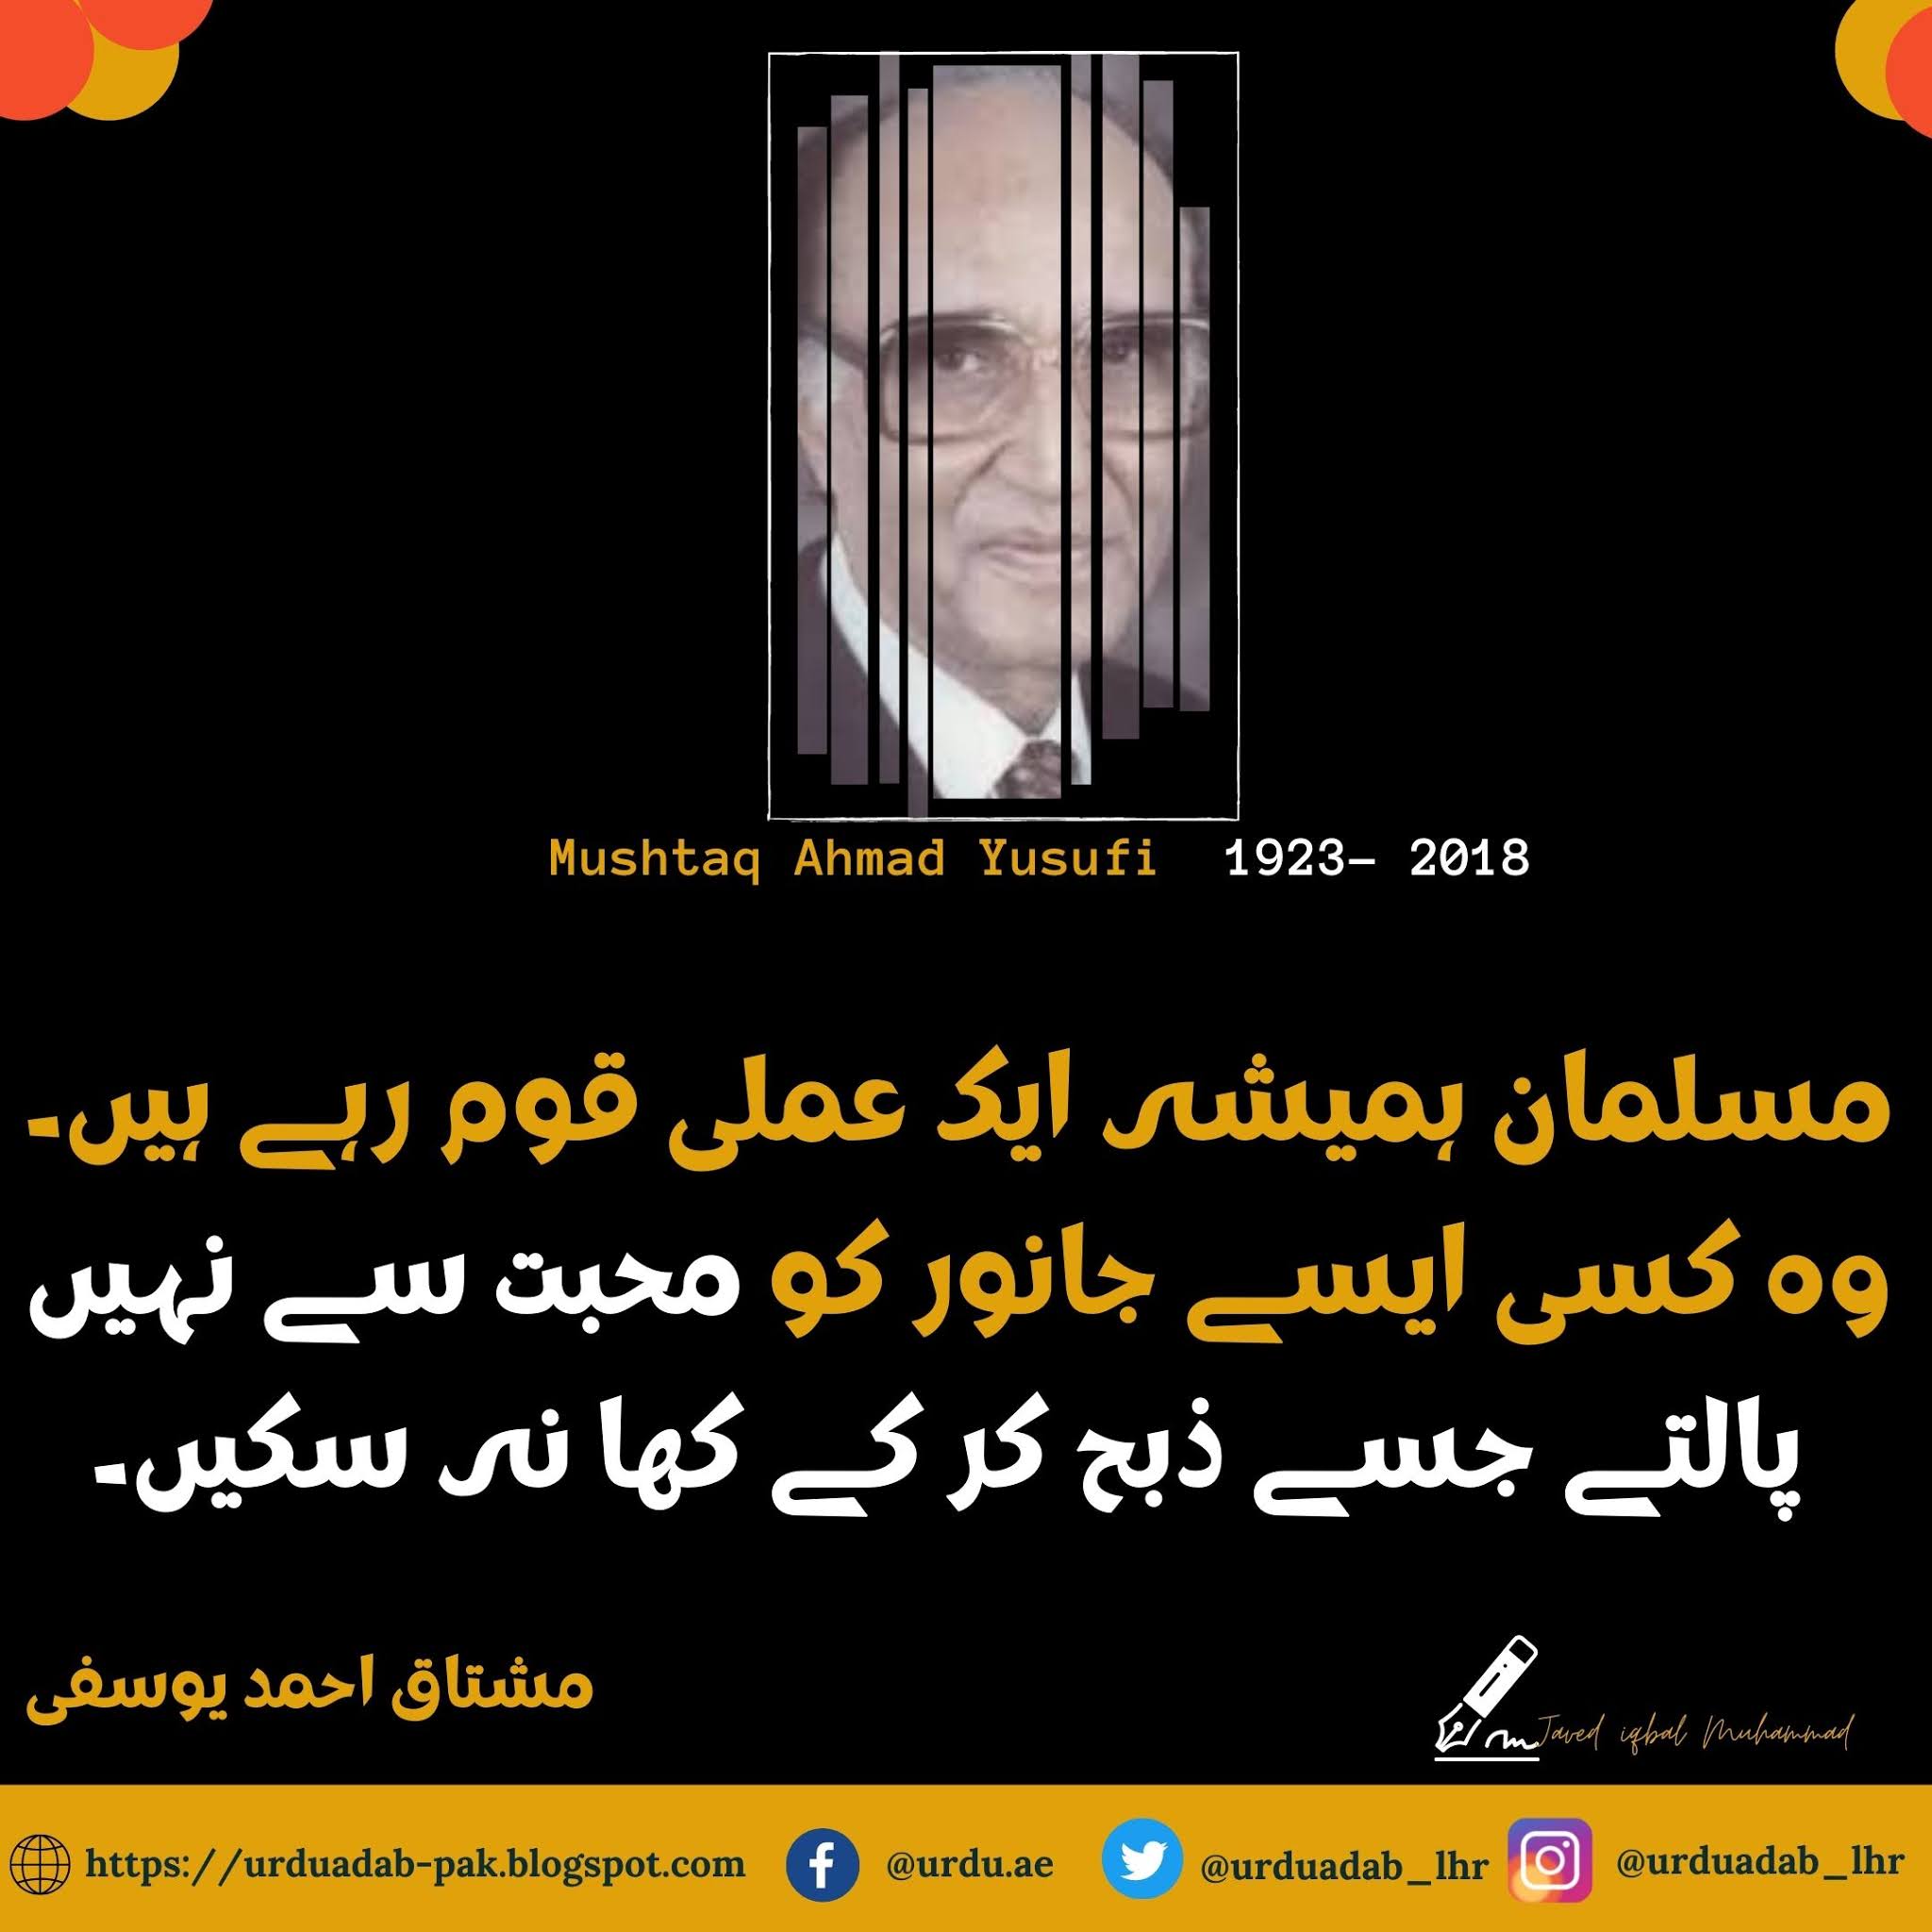 20-Best-Quotes-of-Mushtaq-Ahmed-Yousufi-Quotes-Mushtaq-Ahmad-Yusufi-Funny Quotes-Mushtaq-Ahmad- Yusufi-Tanz-o-Mazah-mushtaq-ahmad-yusufi-quotes-in hindi-Mushtaq-Ahmed-Yousufi-Quotes